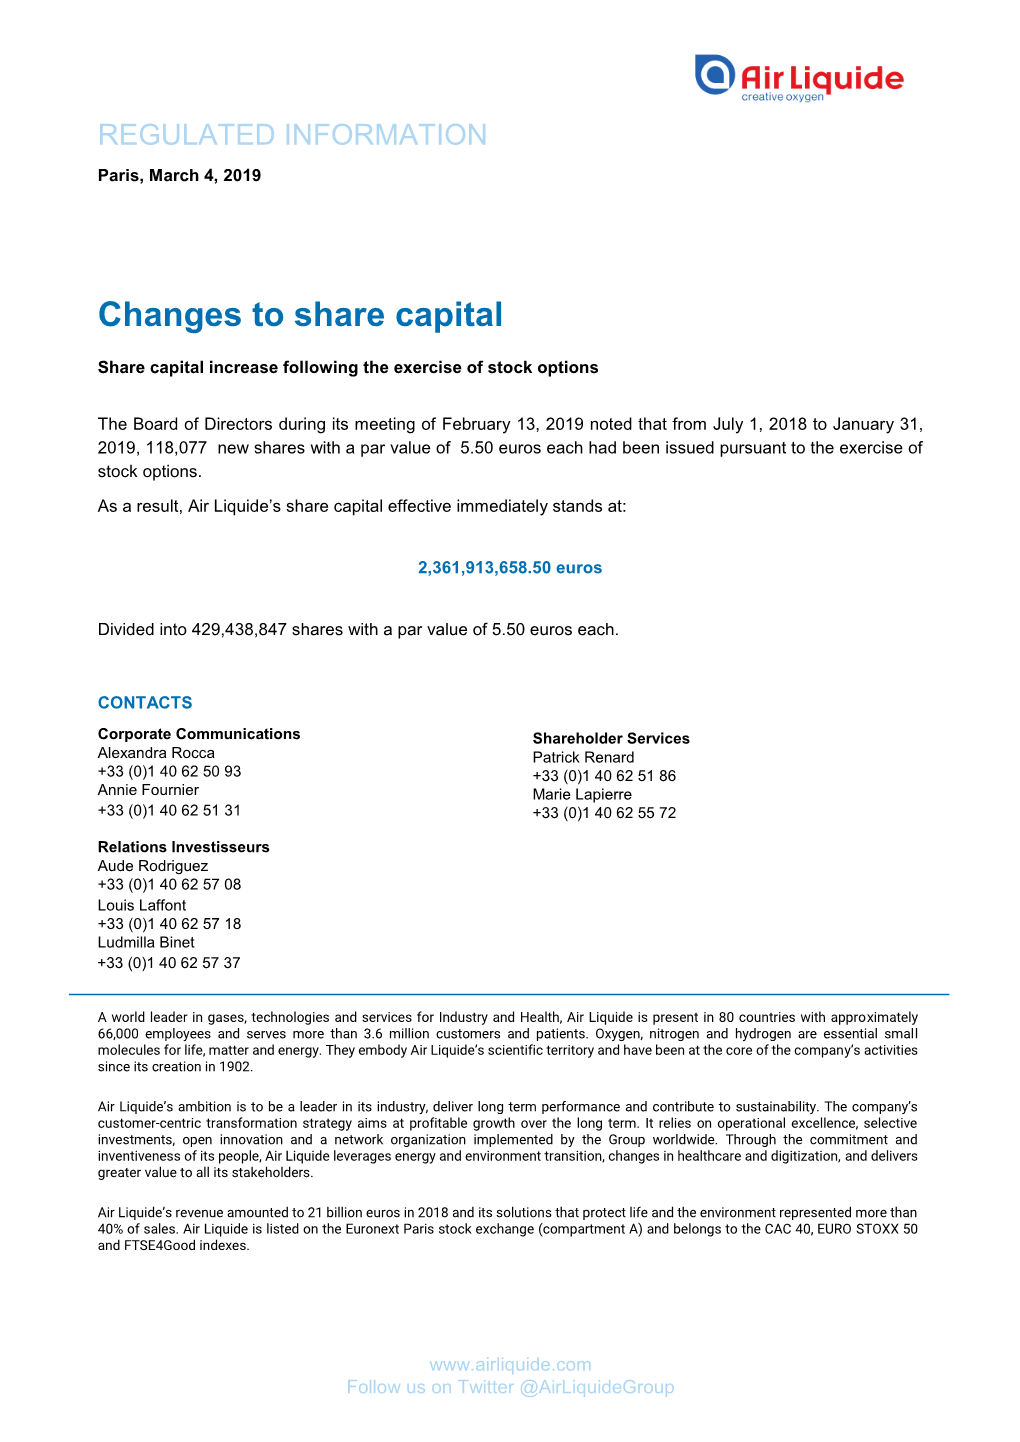 Changes to Share Capital